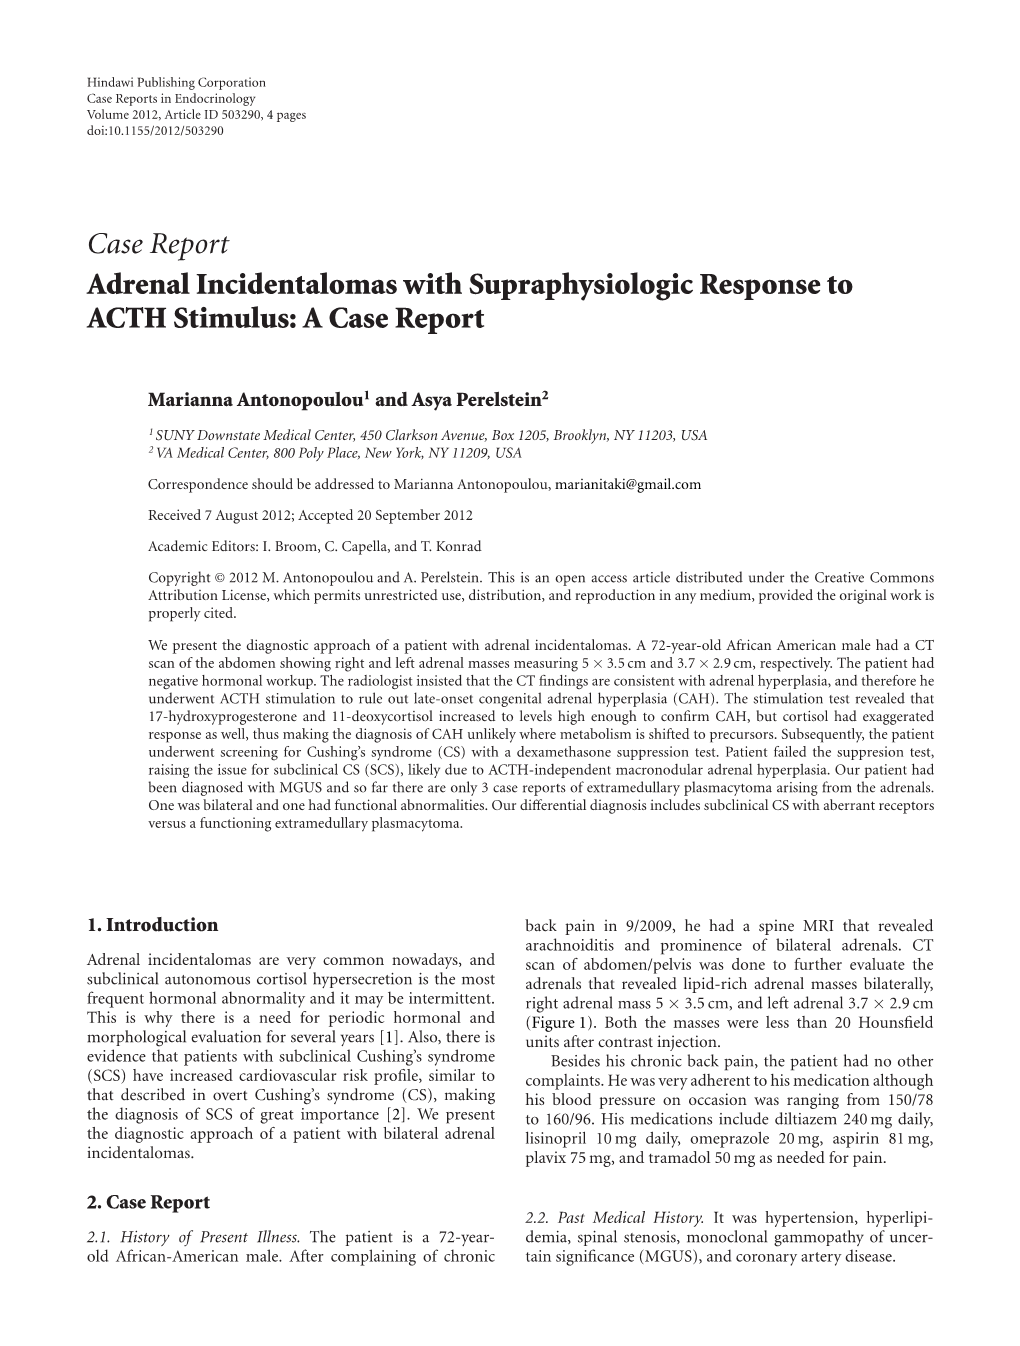 Adrenal Incidentalomas with Supraphysiologic Response to ACTH Stimulus: a Case Report